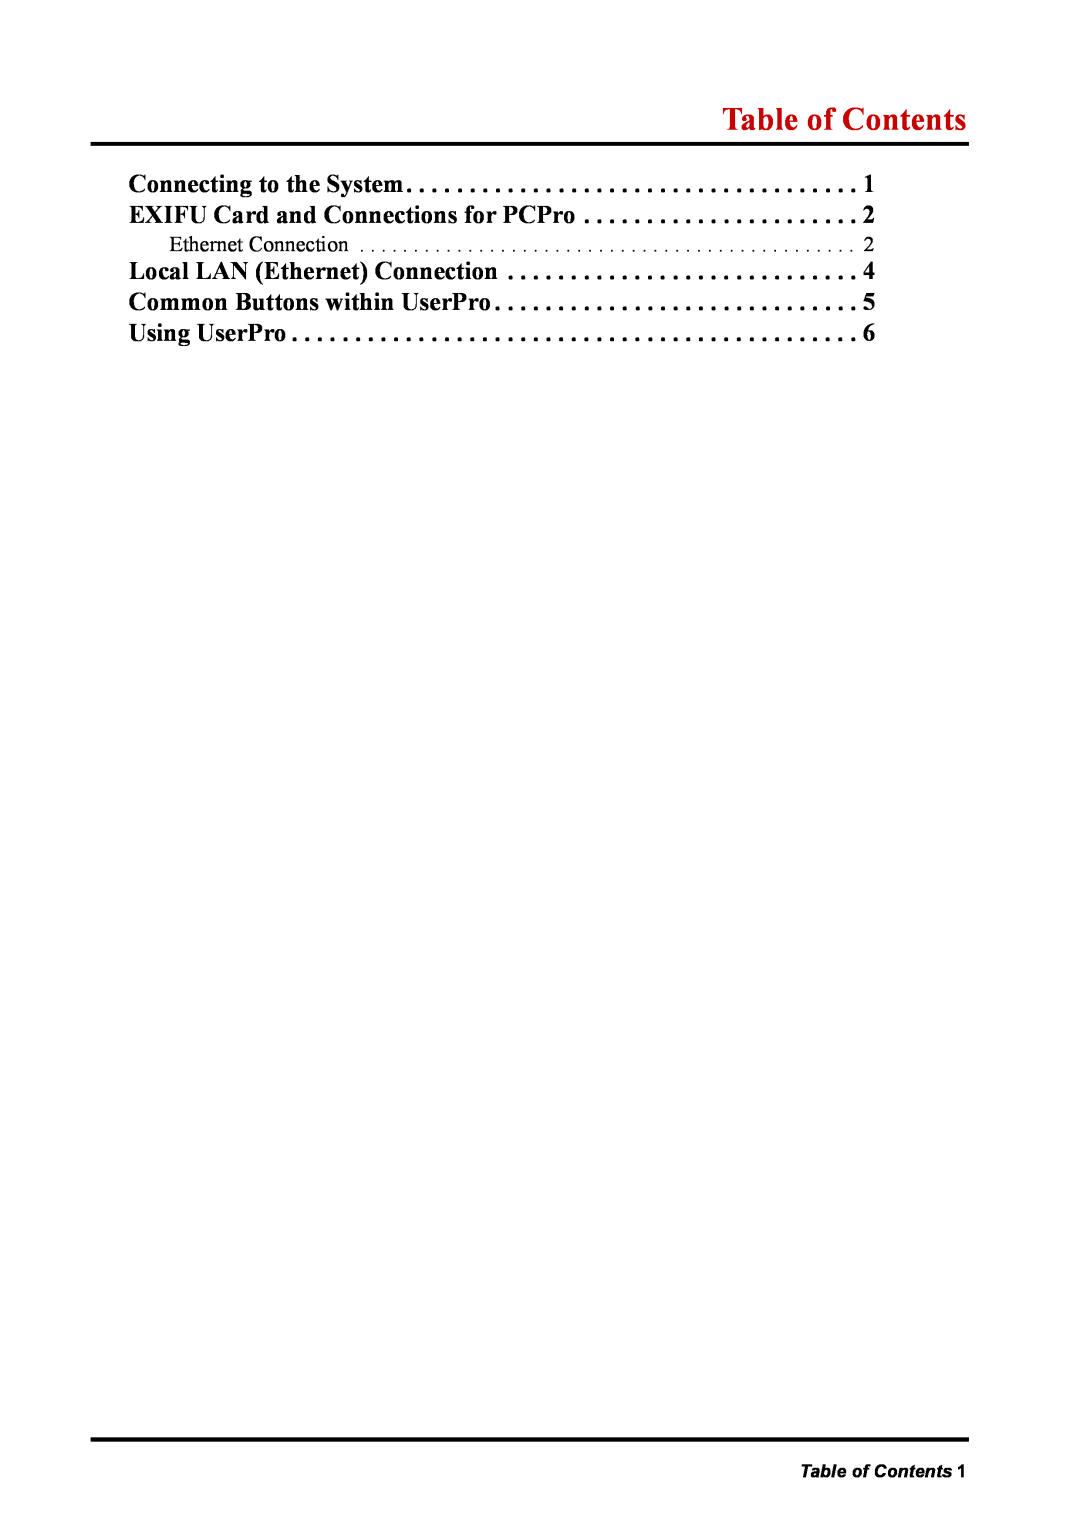 NEC XN120 manual Table of Contents, Ethernet Connection 